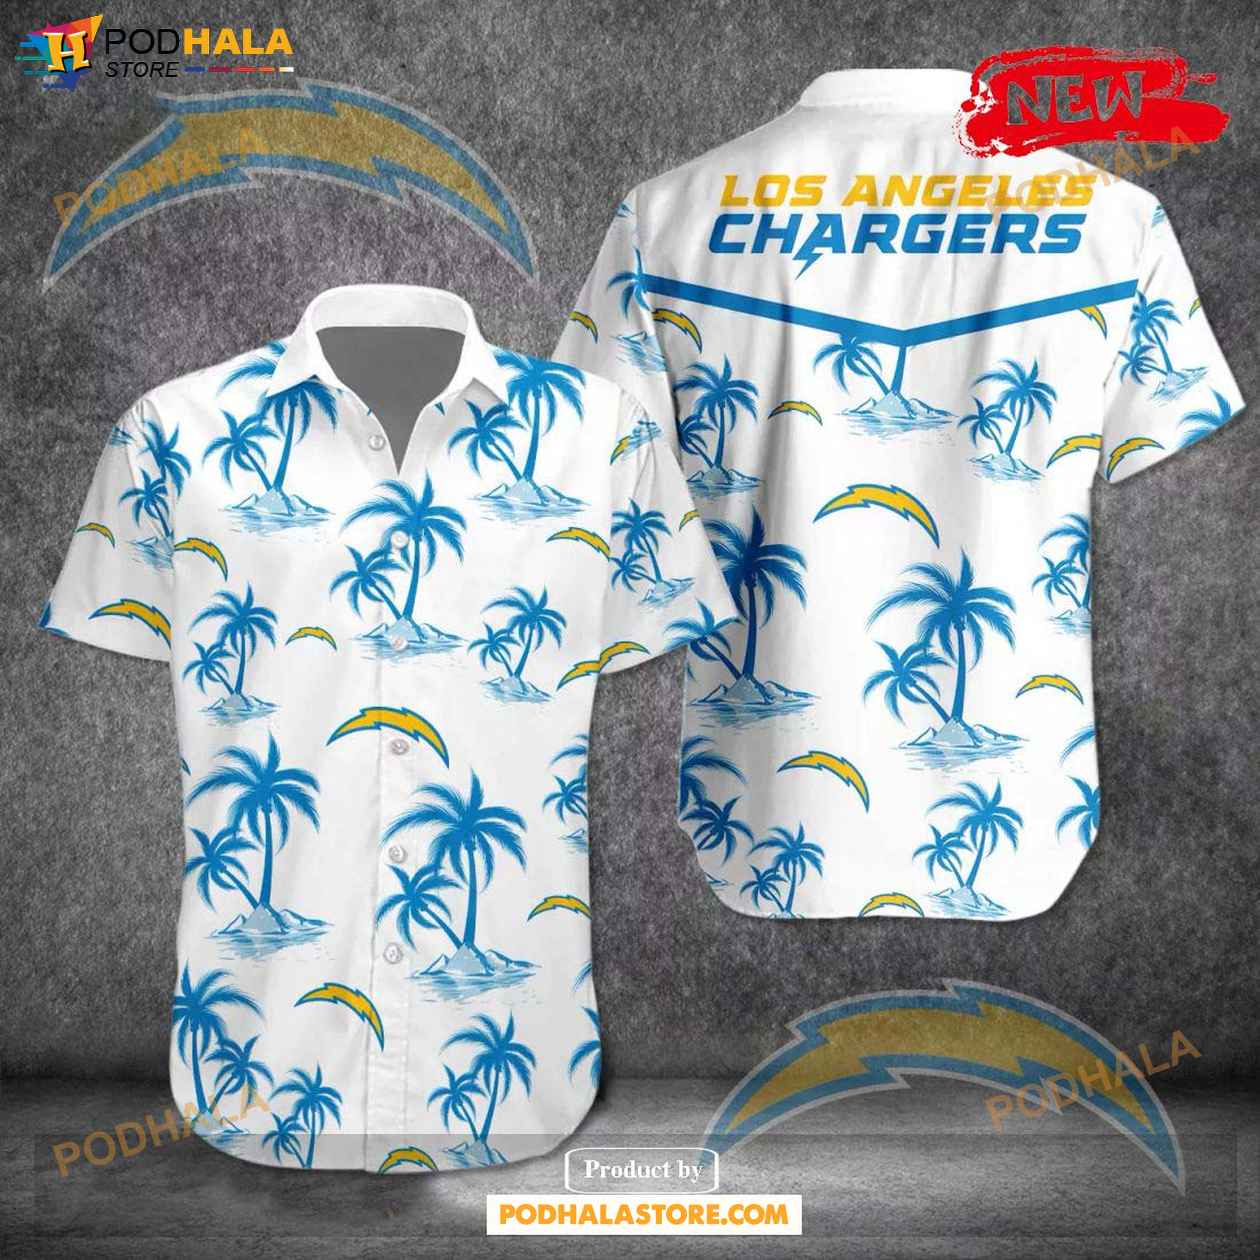 Los Angeles Chargers T-shirt 3D new style Short Sleeve gift for fan -Jack  sport shop